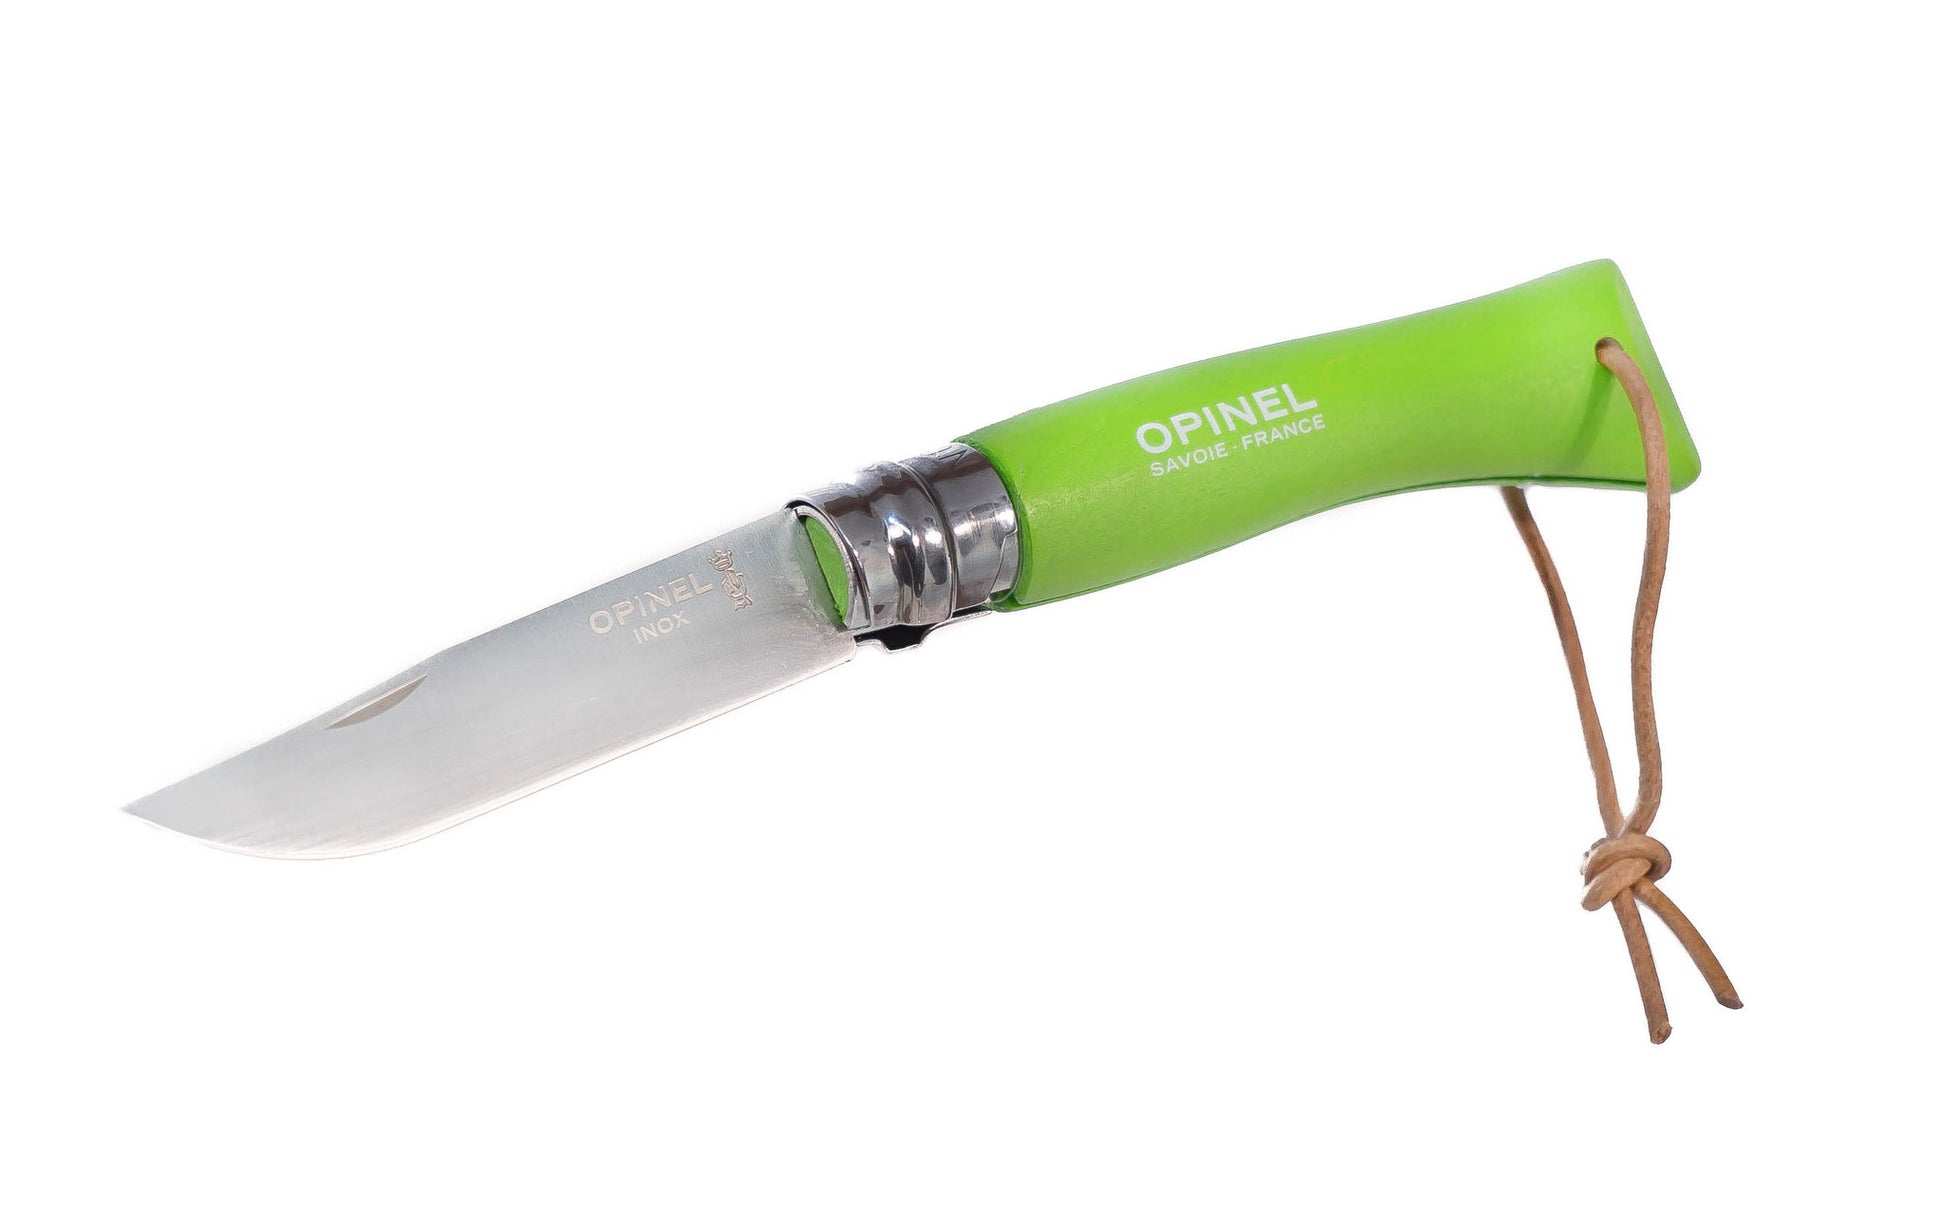 Opinel Stainless Steel Trekking Knife ~ "Apple Green" Color ~ Made in France ~ 3-3/16" long foldable blade with stainless locking collar ~ Made of 12c27 Sandvik stainless steel ~ Painted Beechwood handle with leather loop